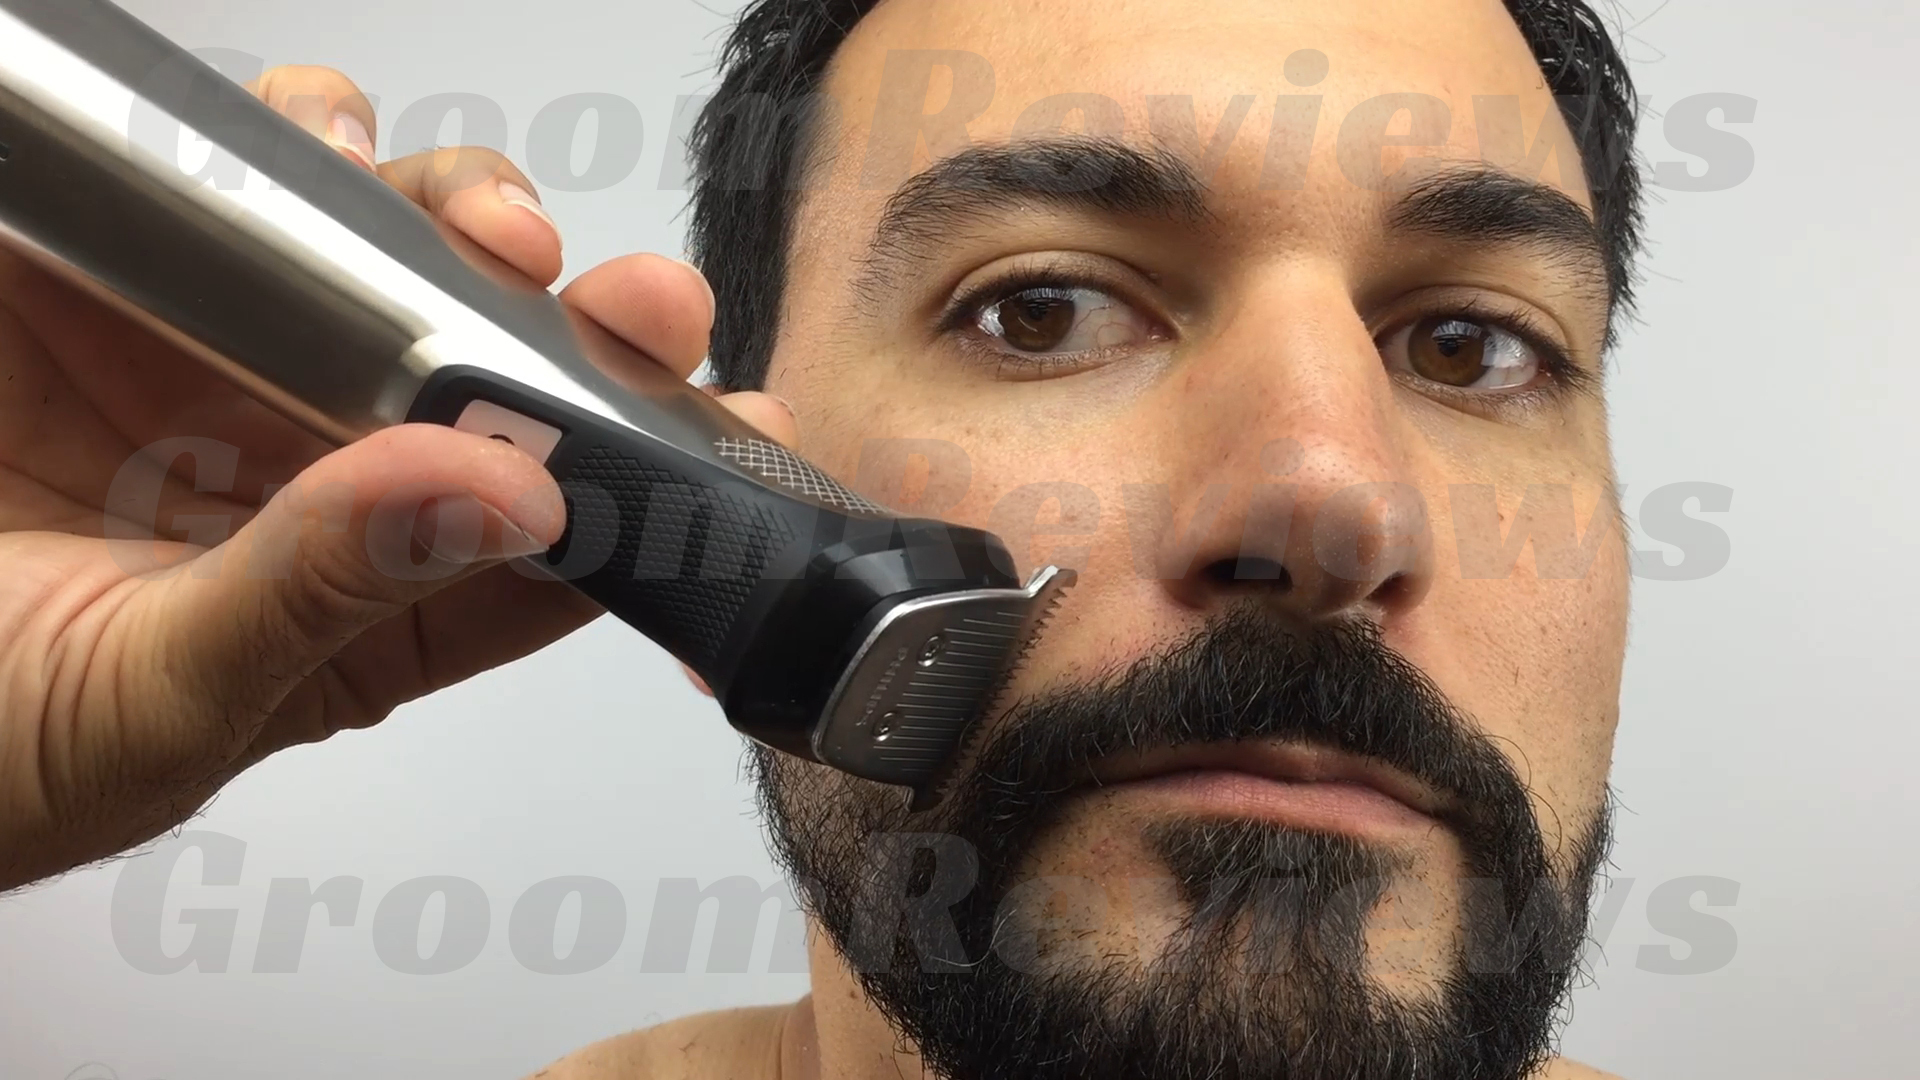 philips hair trimmer 7715